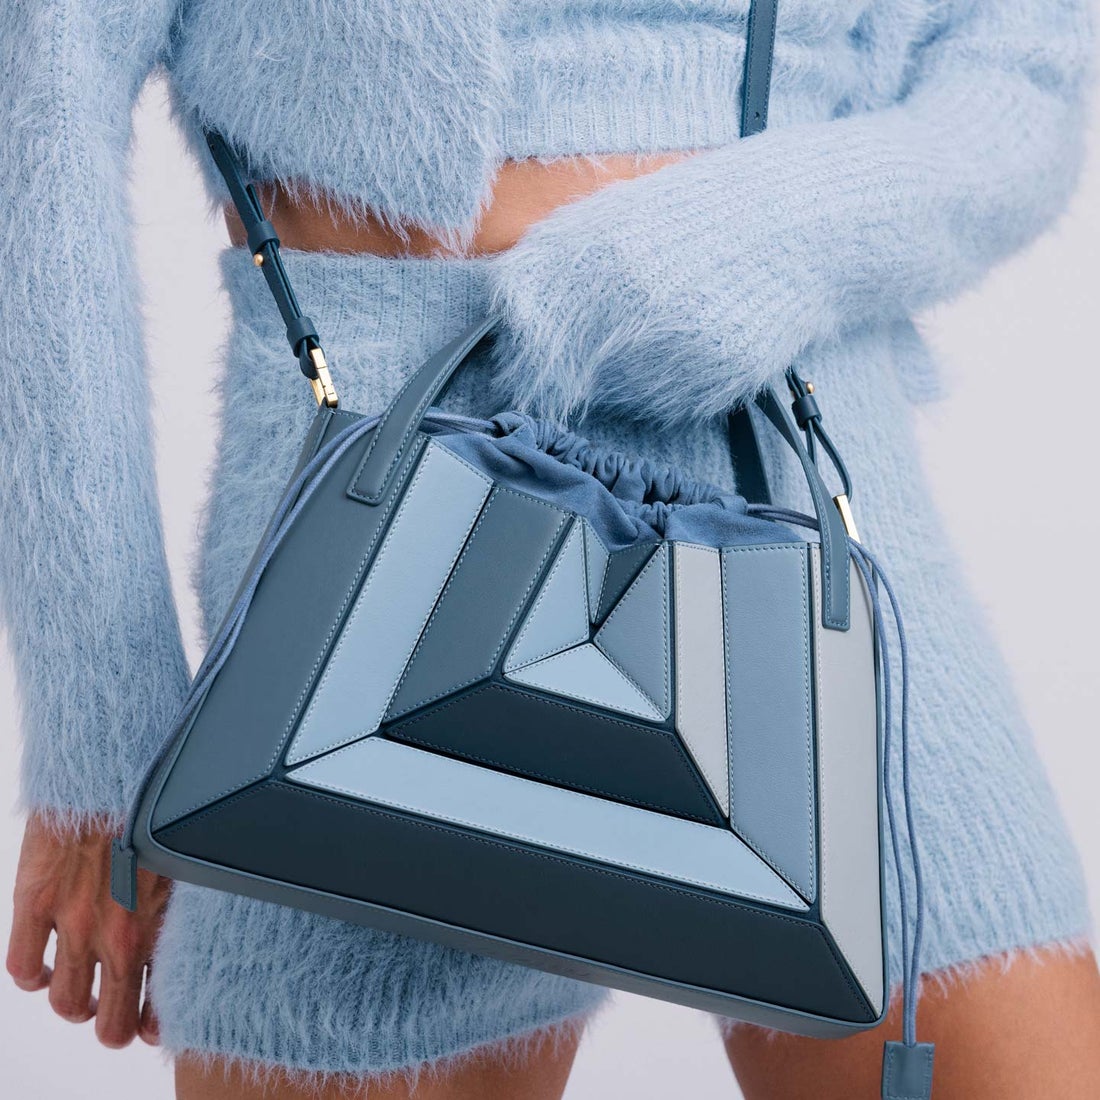 A woman models a blue handbag while wearing a fuzzy textured pale blue outfit. 